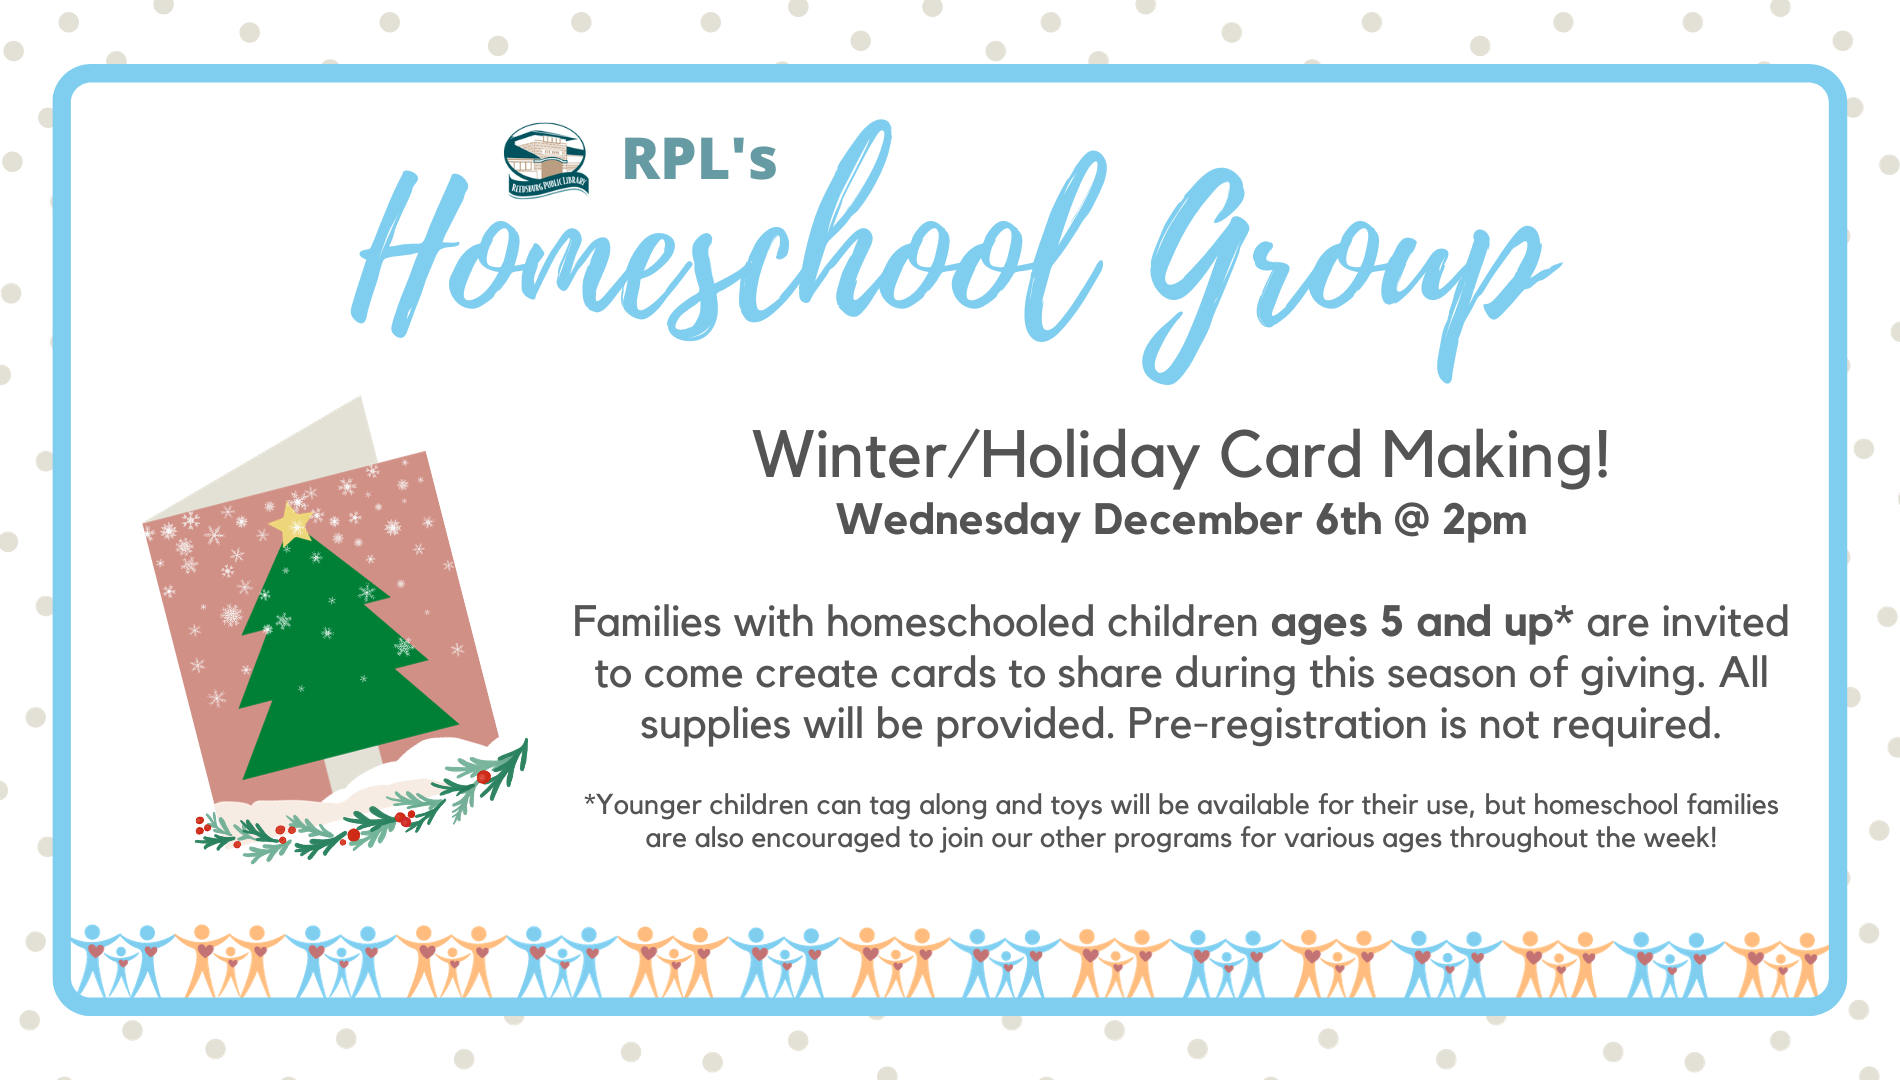 RPL's Homeschool Group - Winter/Holiday Card Making!